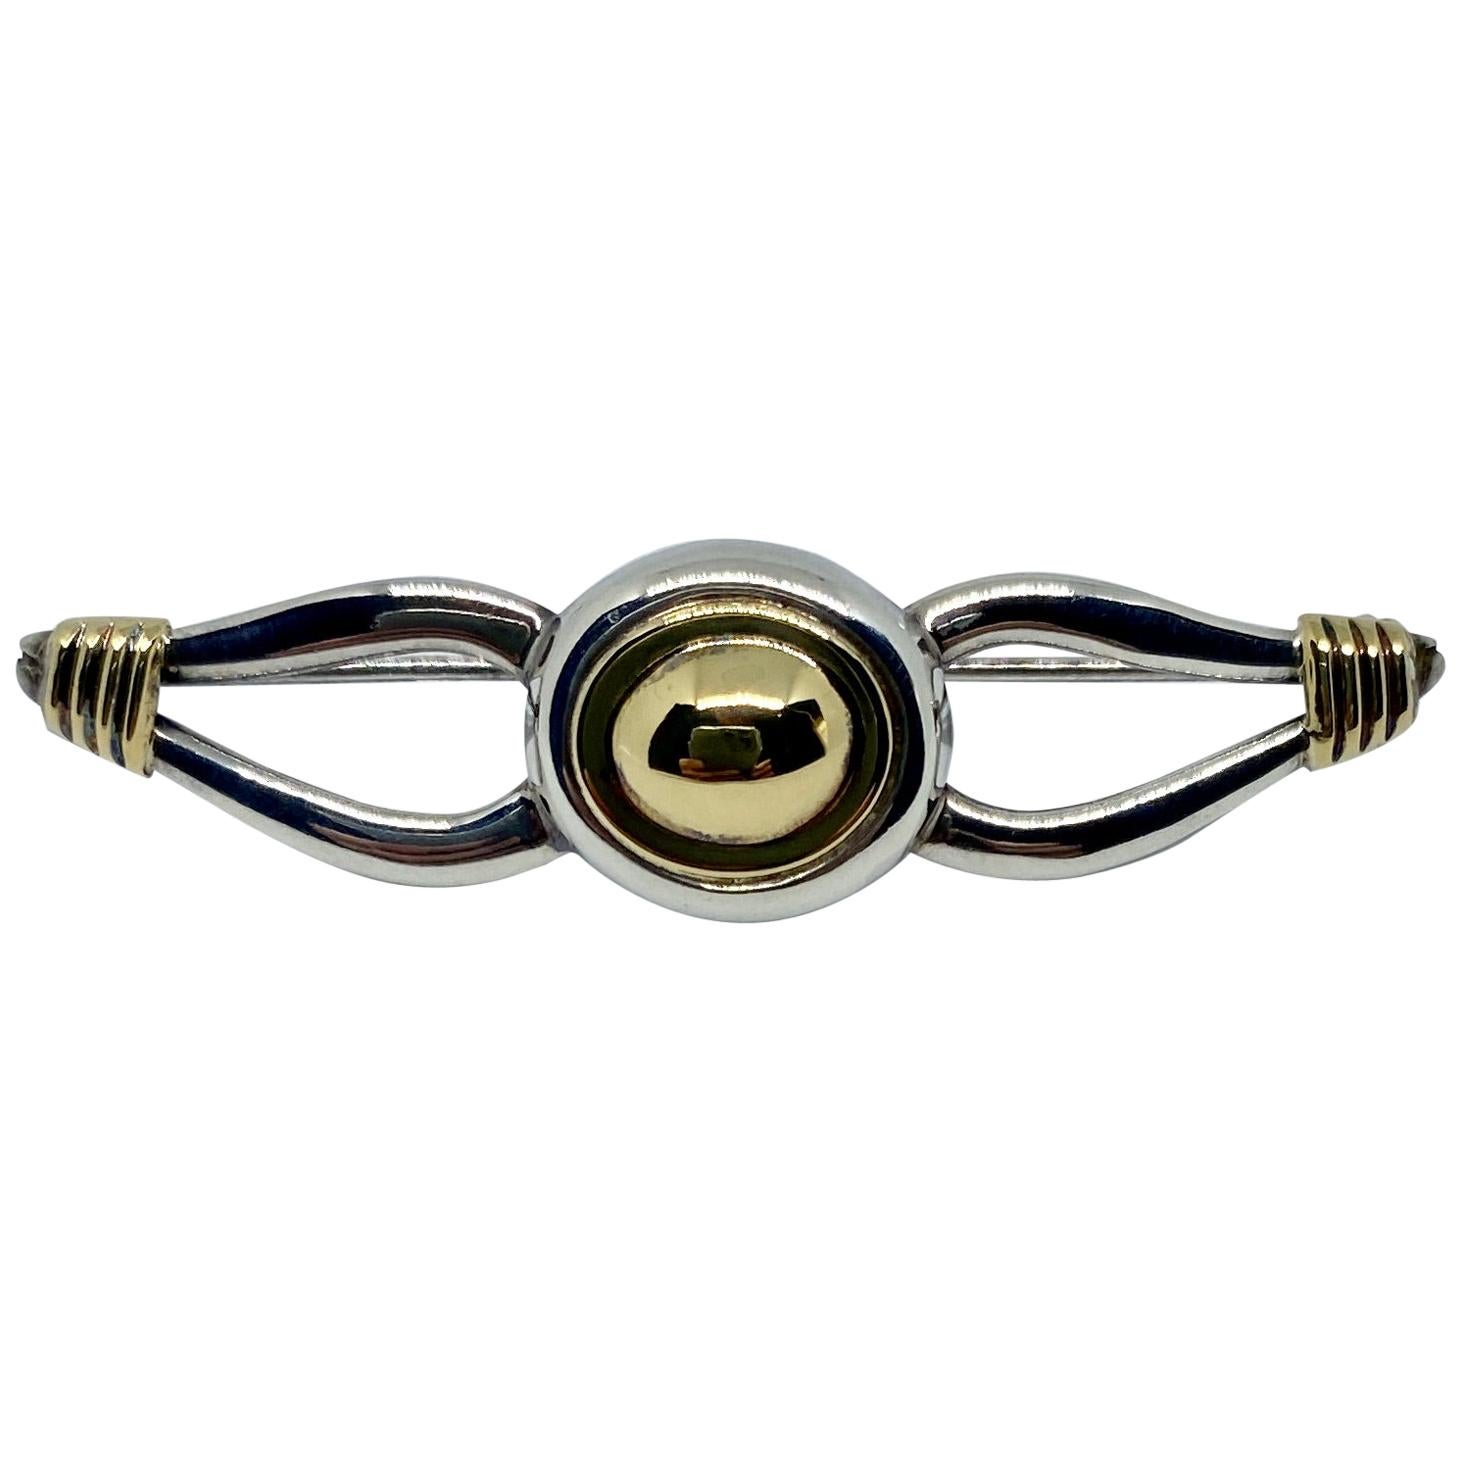 Christofle Brooch in 18 Karat Gold and Sterling Silver